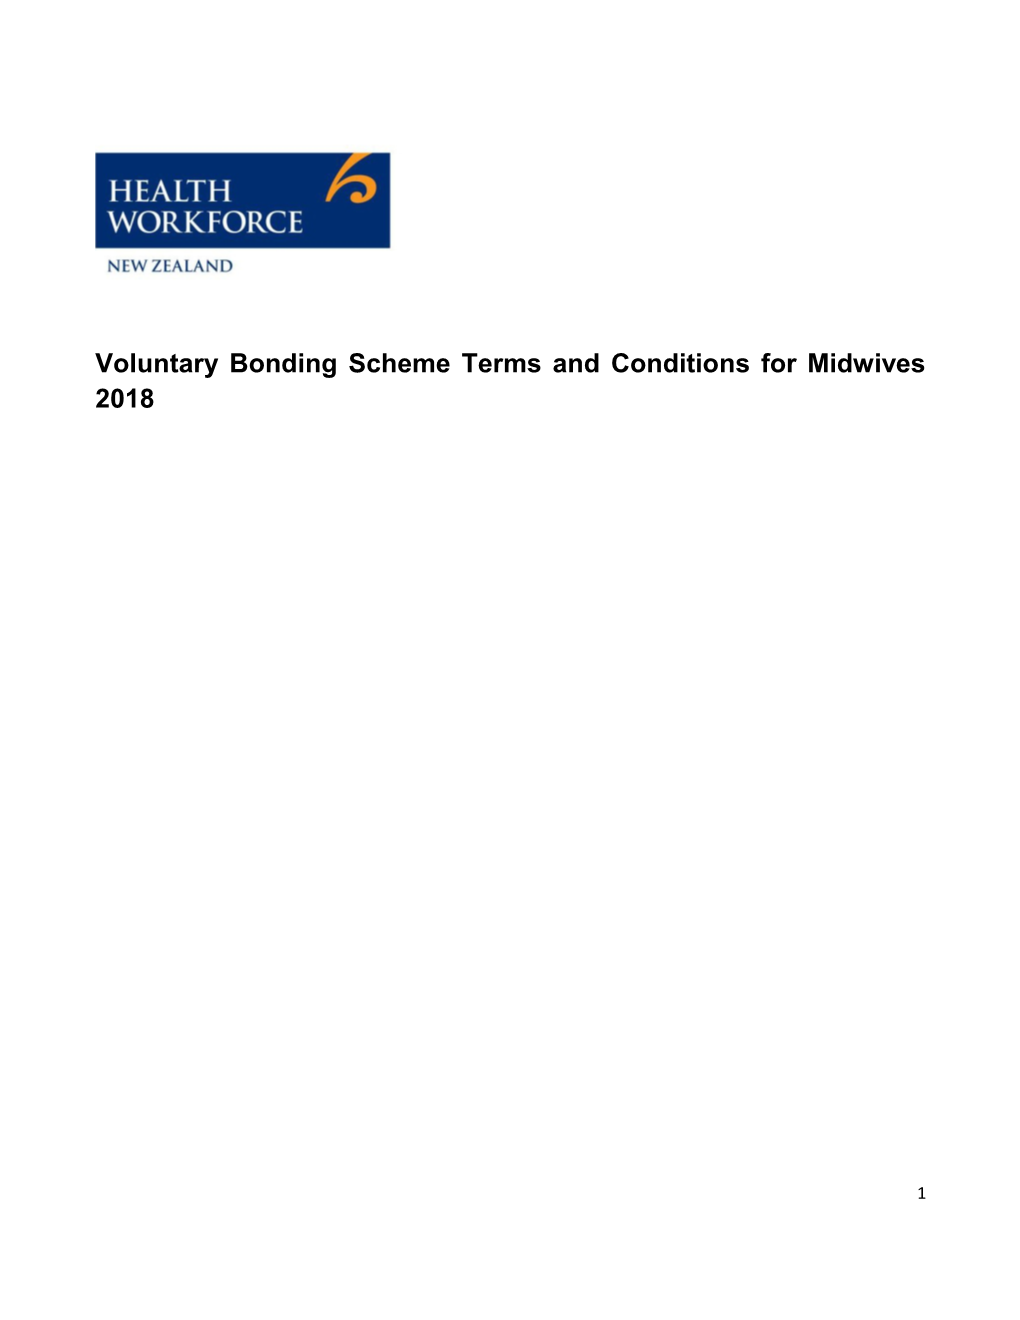 Voluntary Bonding Scheme Terms and Conditions for Midwives 2018